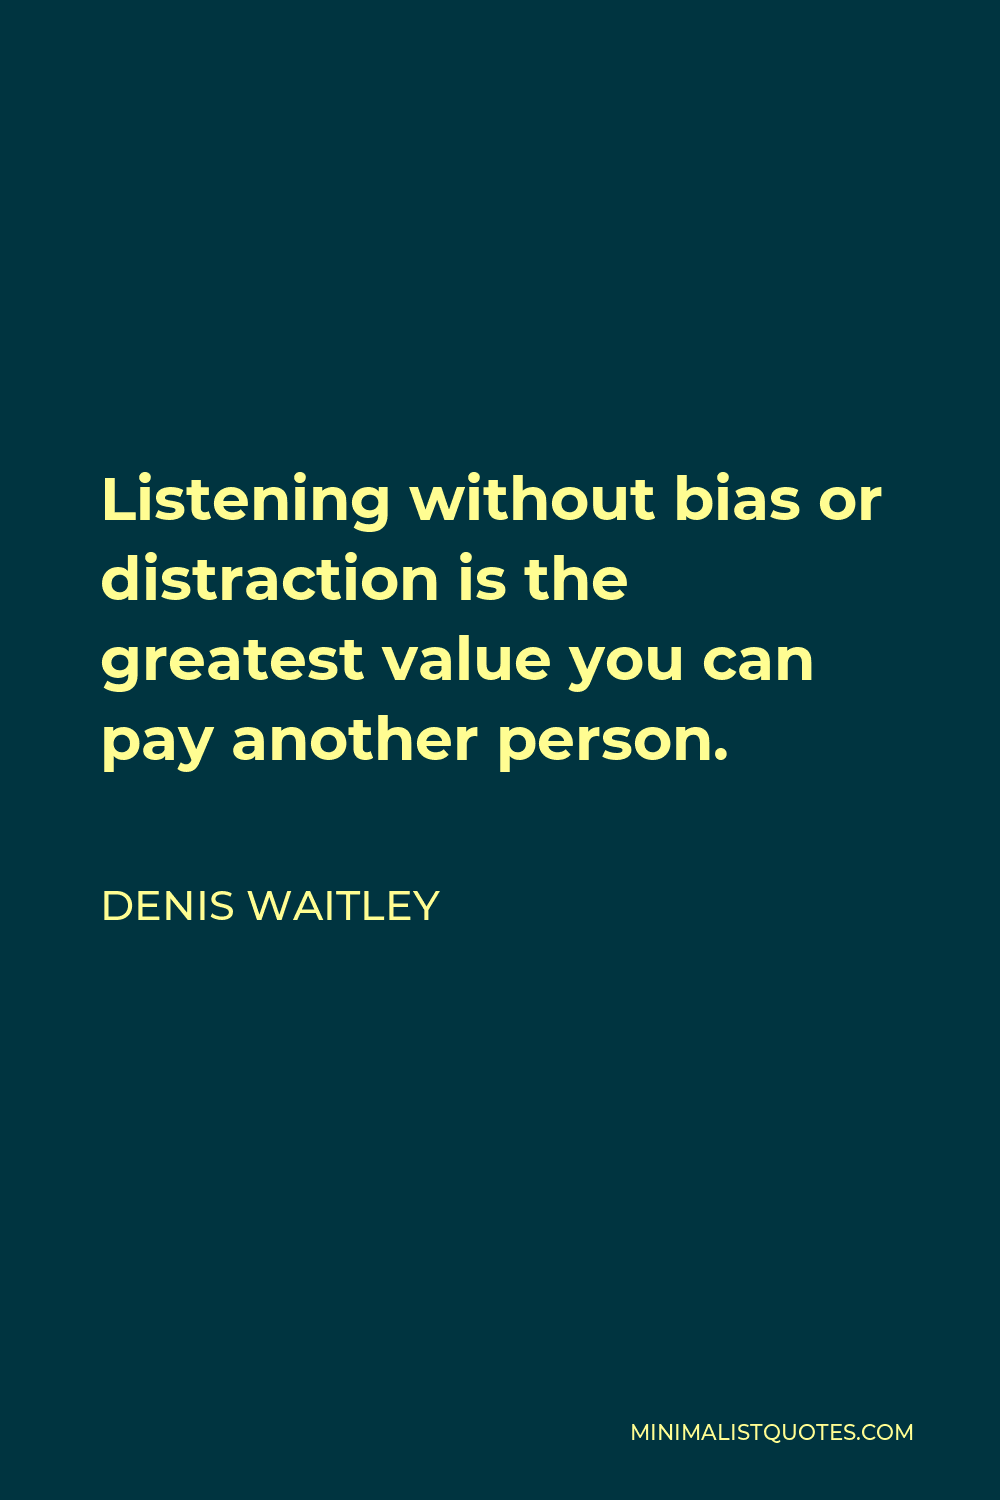 Denis Waitley Quote - Listening without bias or distraction is the greatest value you can pay another person.